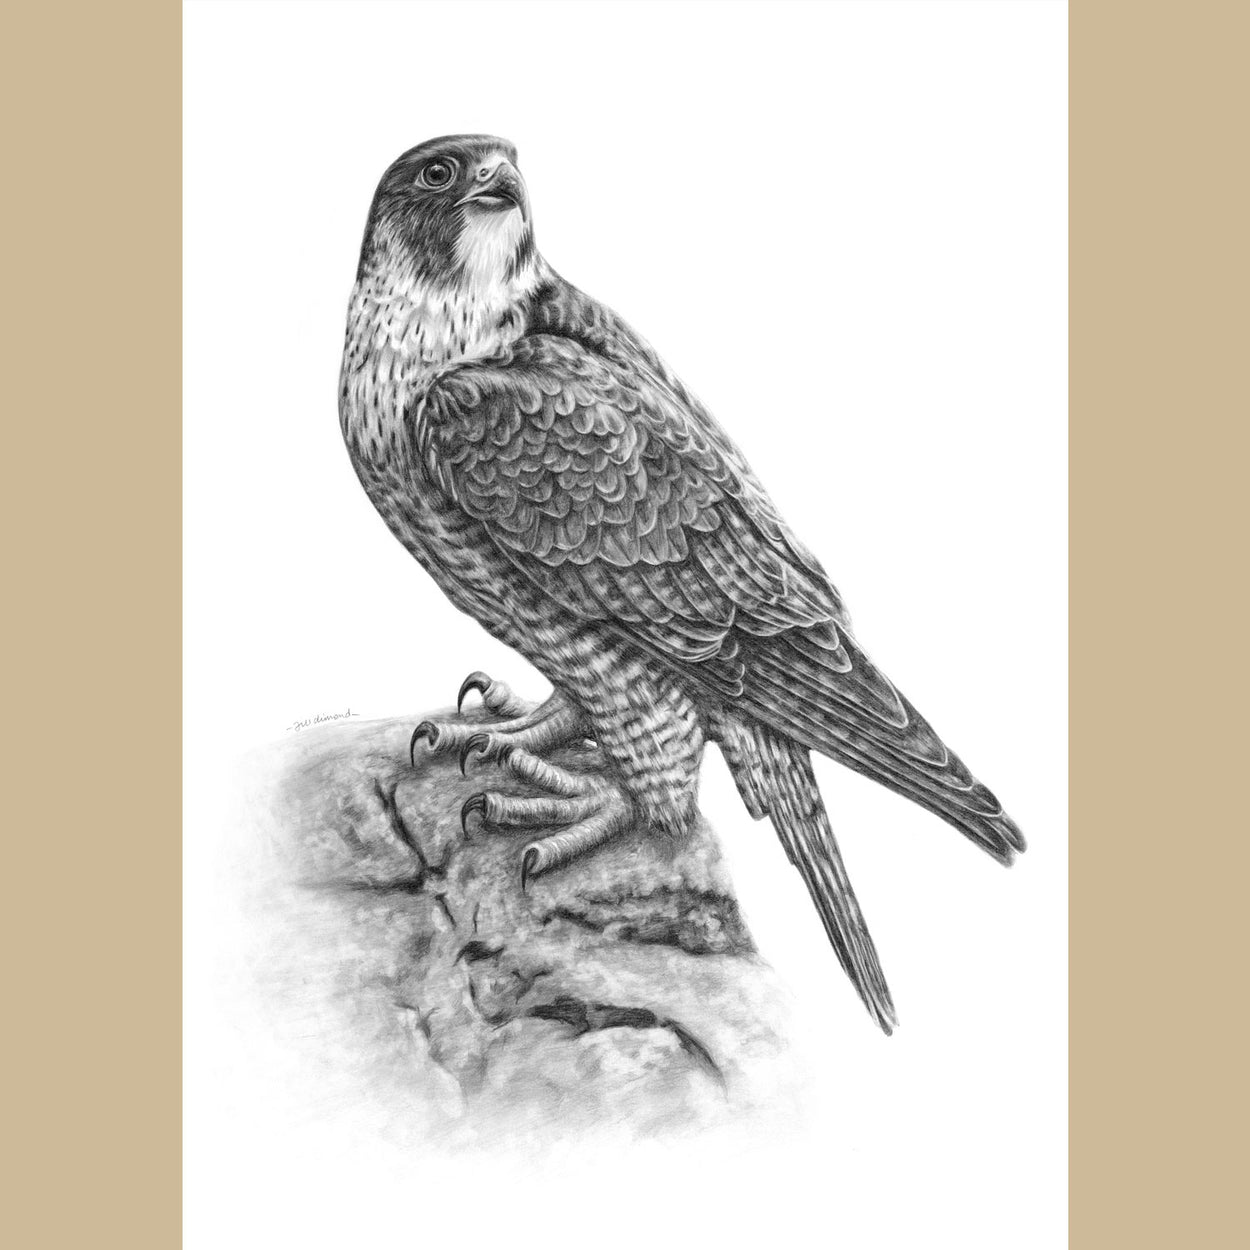 Peregrine Pencil Drawing - The Thriving Wild - Jill Dimond